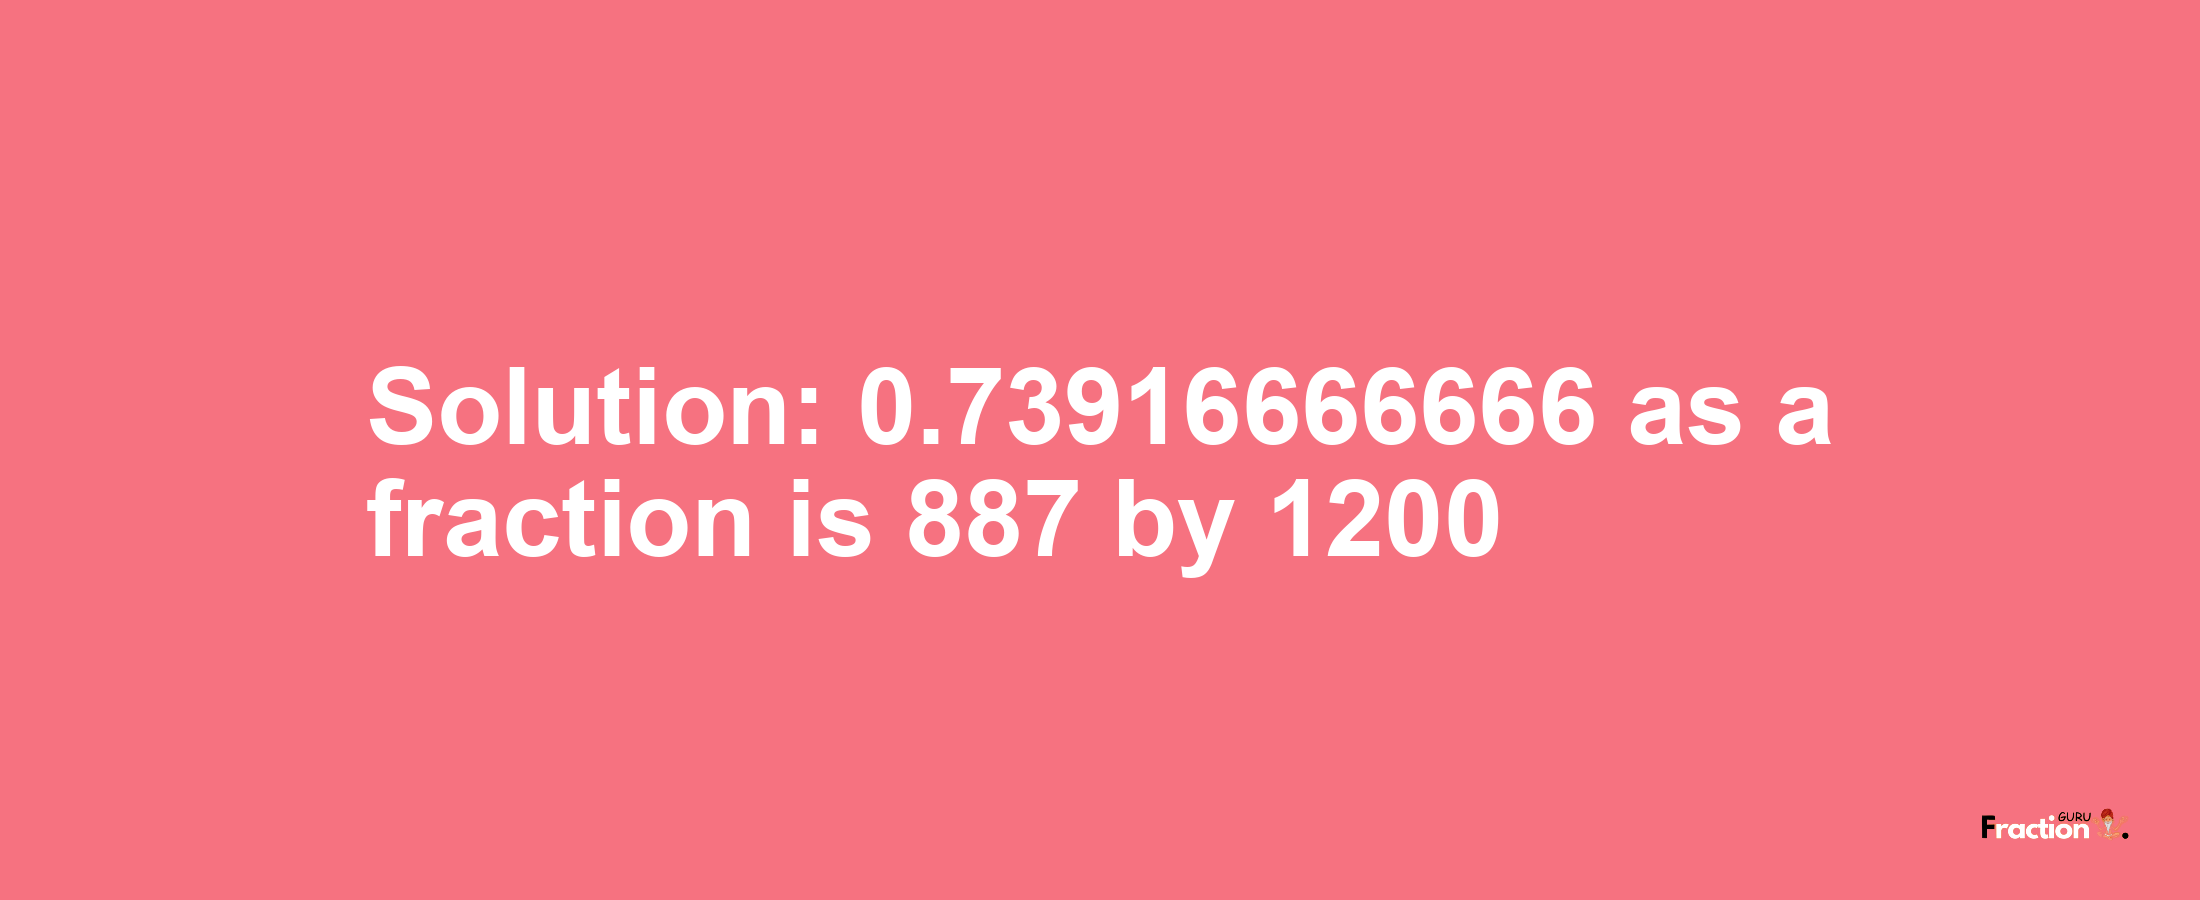 Solution:0.73916666666 as a fraction is 887/1200